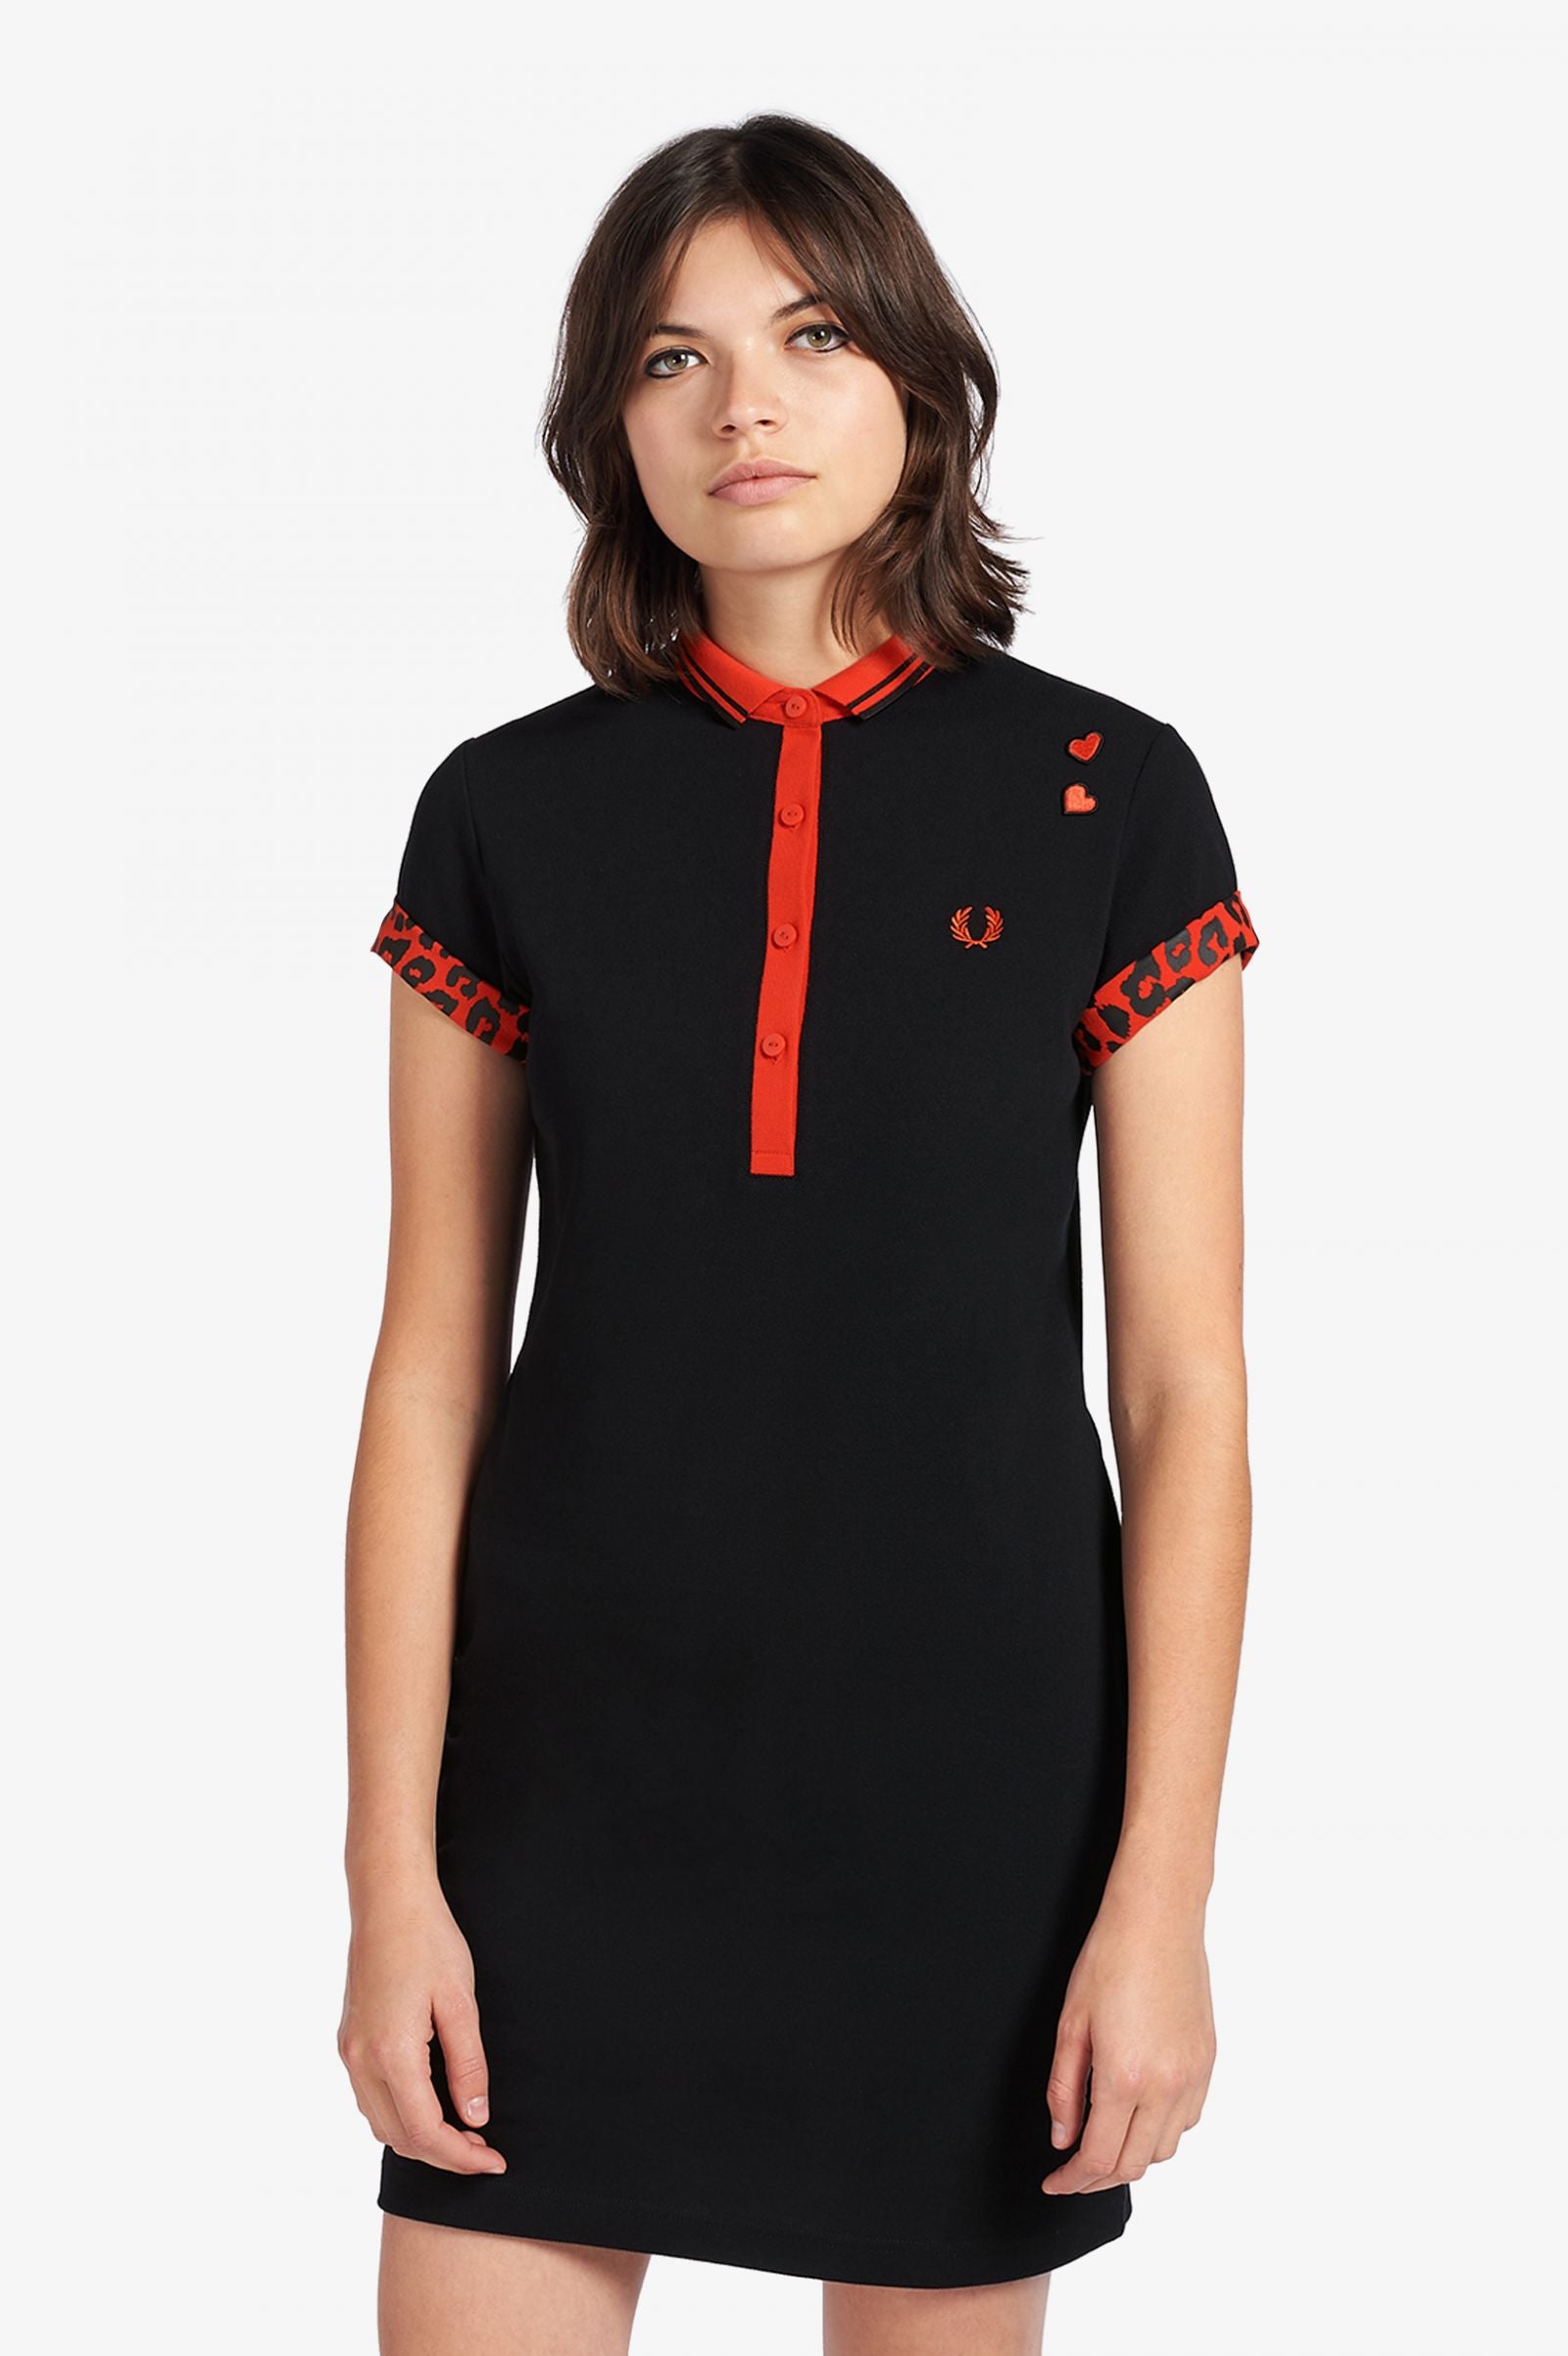 Amy Winehouse Black/Lipstick Tipped Pique Dress – Posers Hollywood